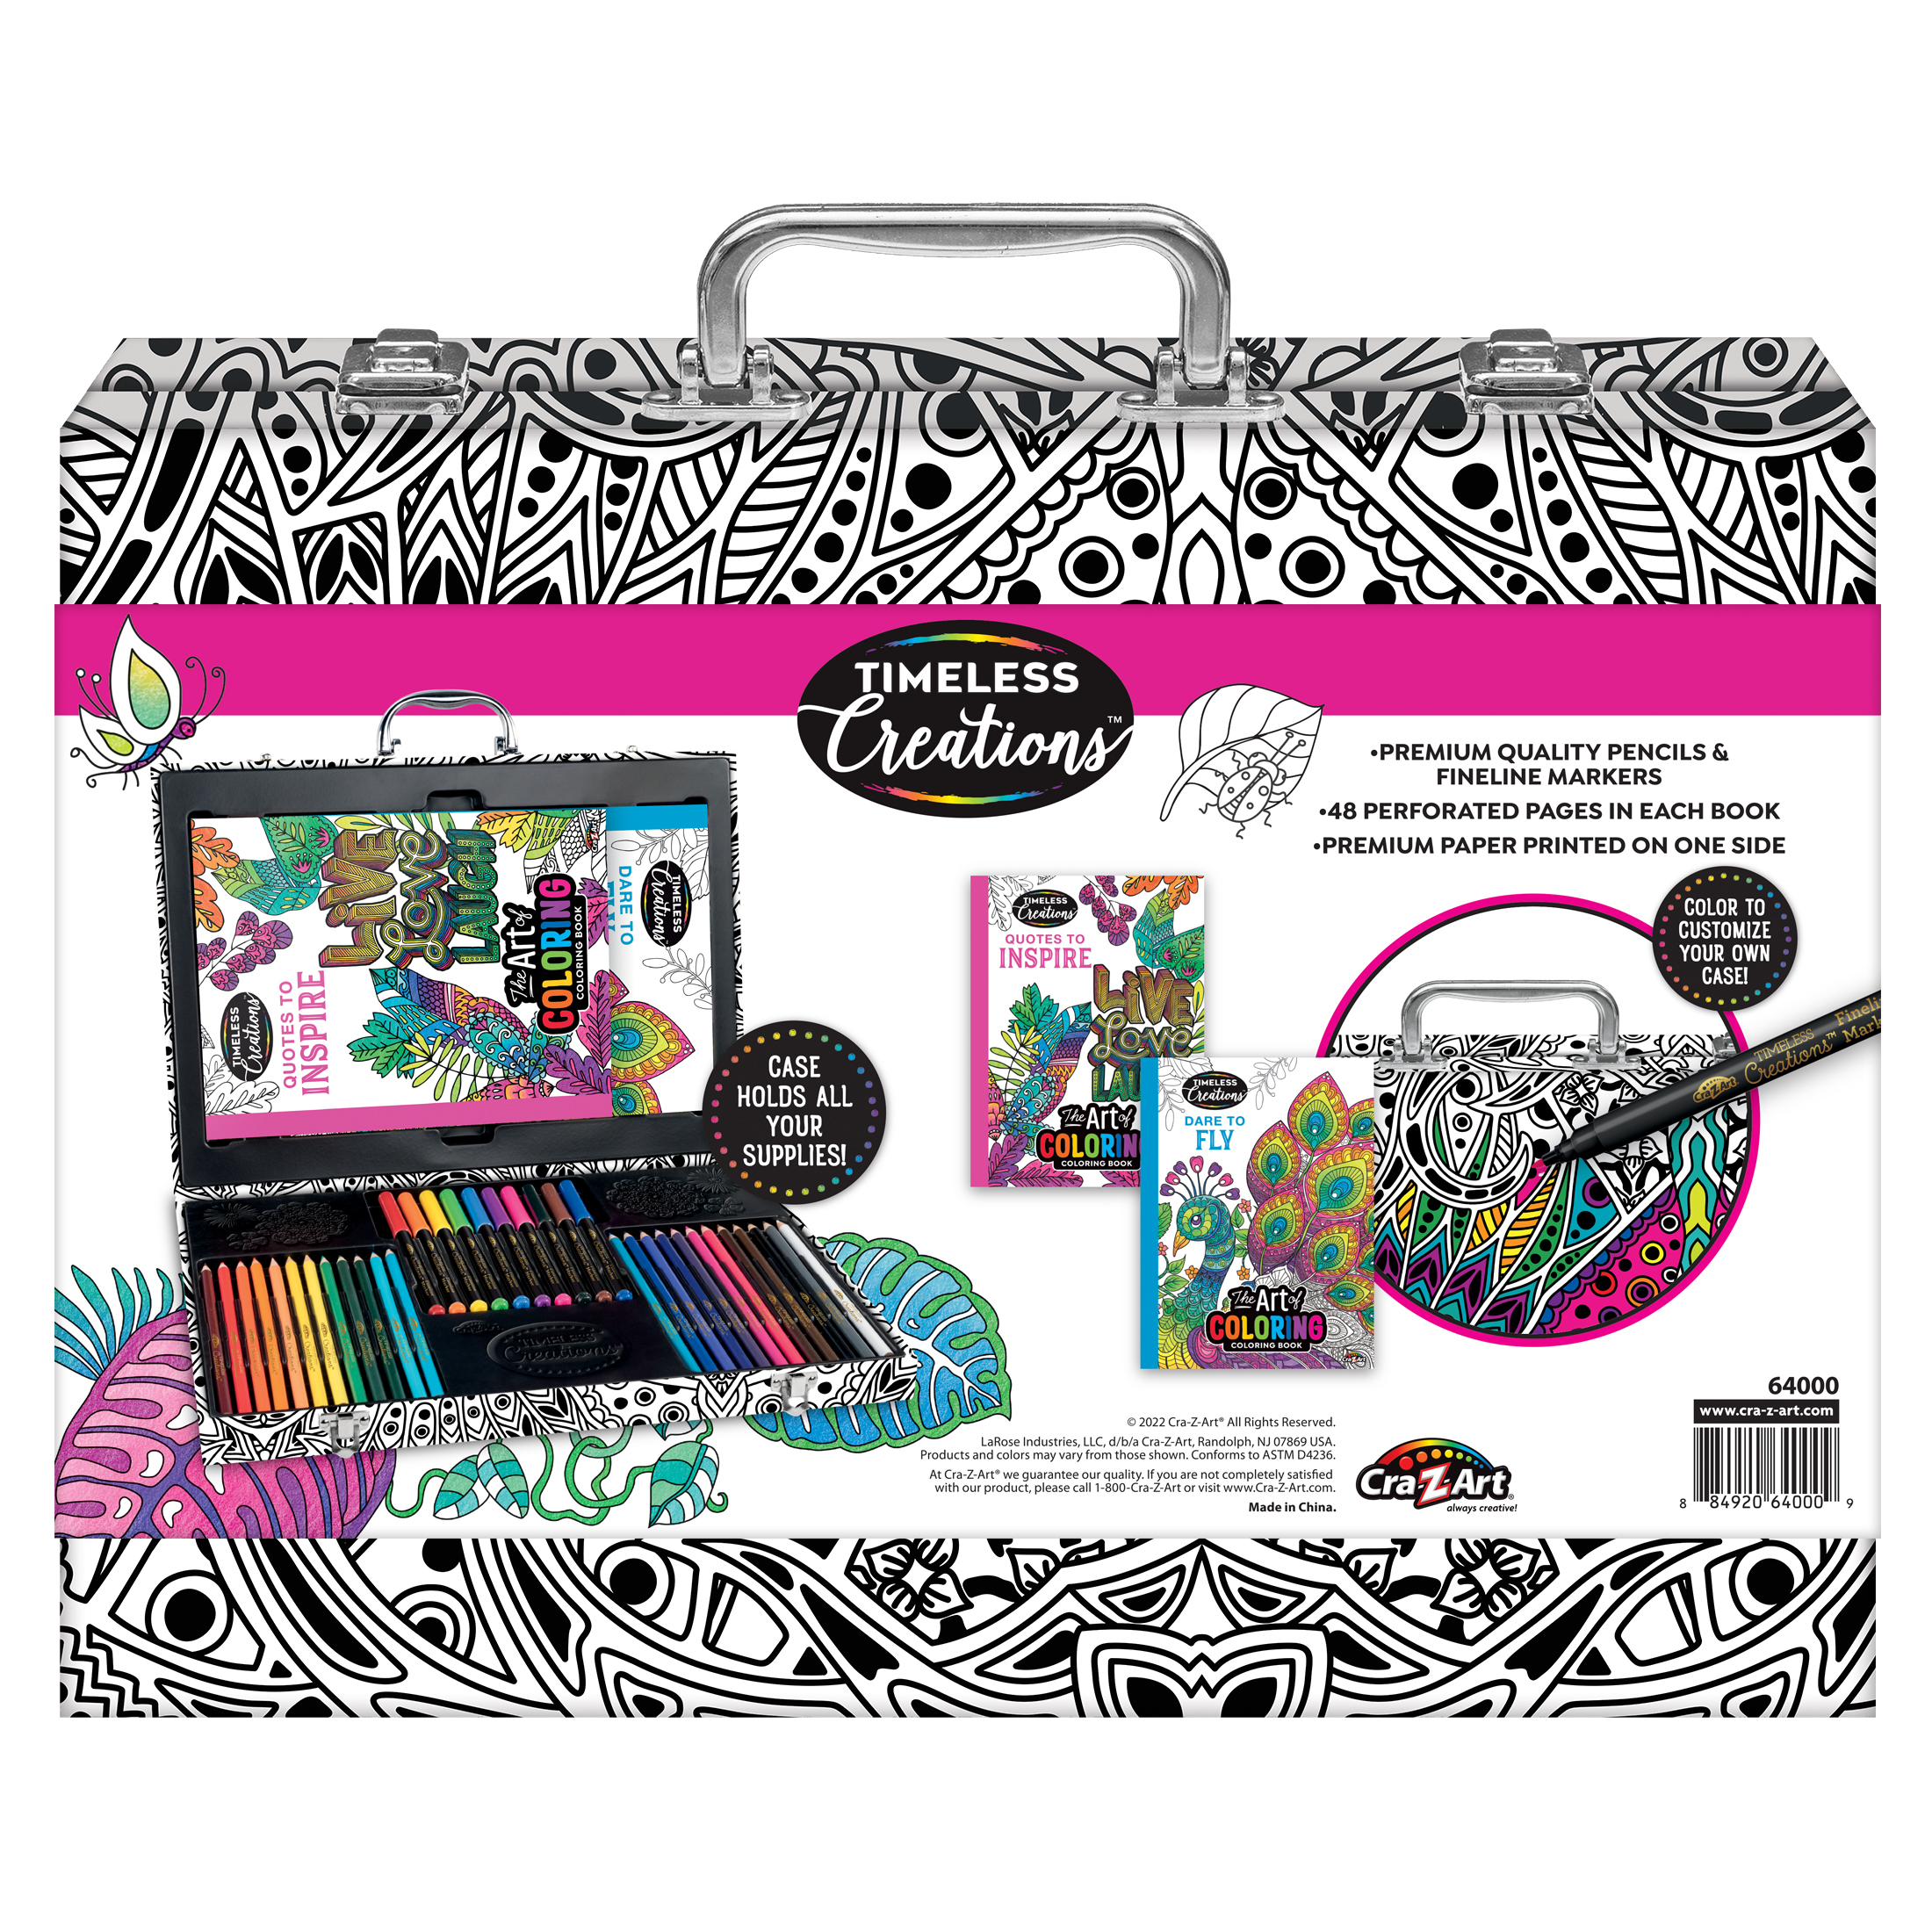 Cra-Z-Art Timeless Creations Multicolor Adult Coloring Drawing Set, Beginner to Expert - image 3 of 9